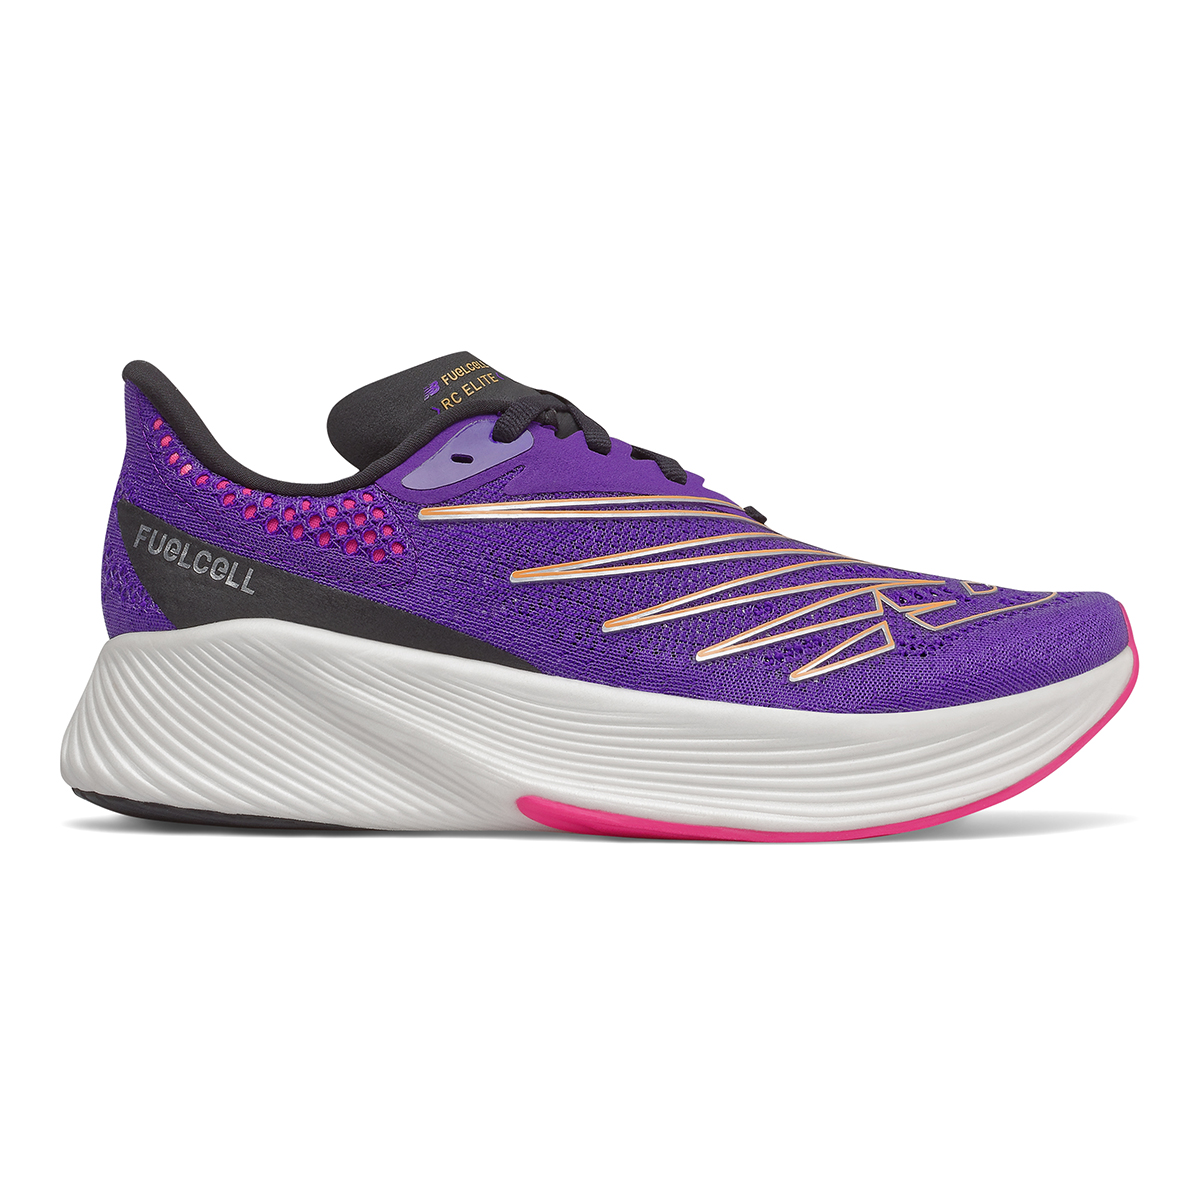 New Balance Fuel Cell RC Elite V2, , large image number null